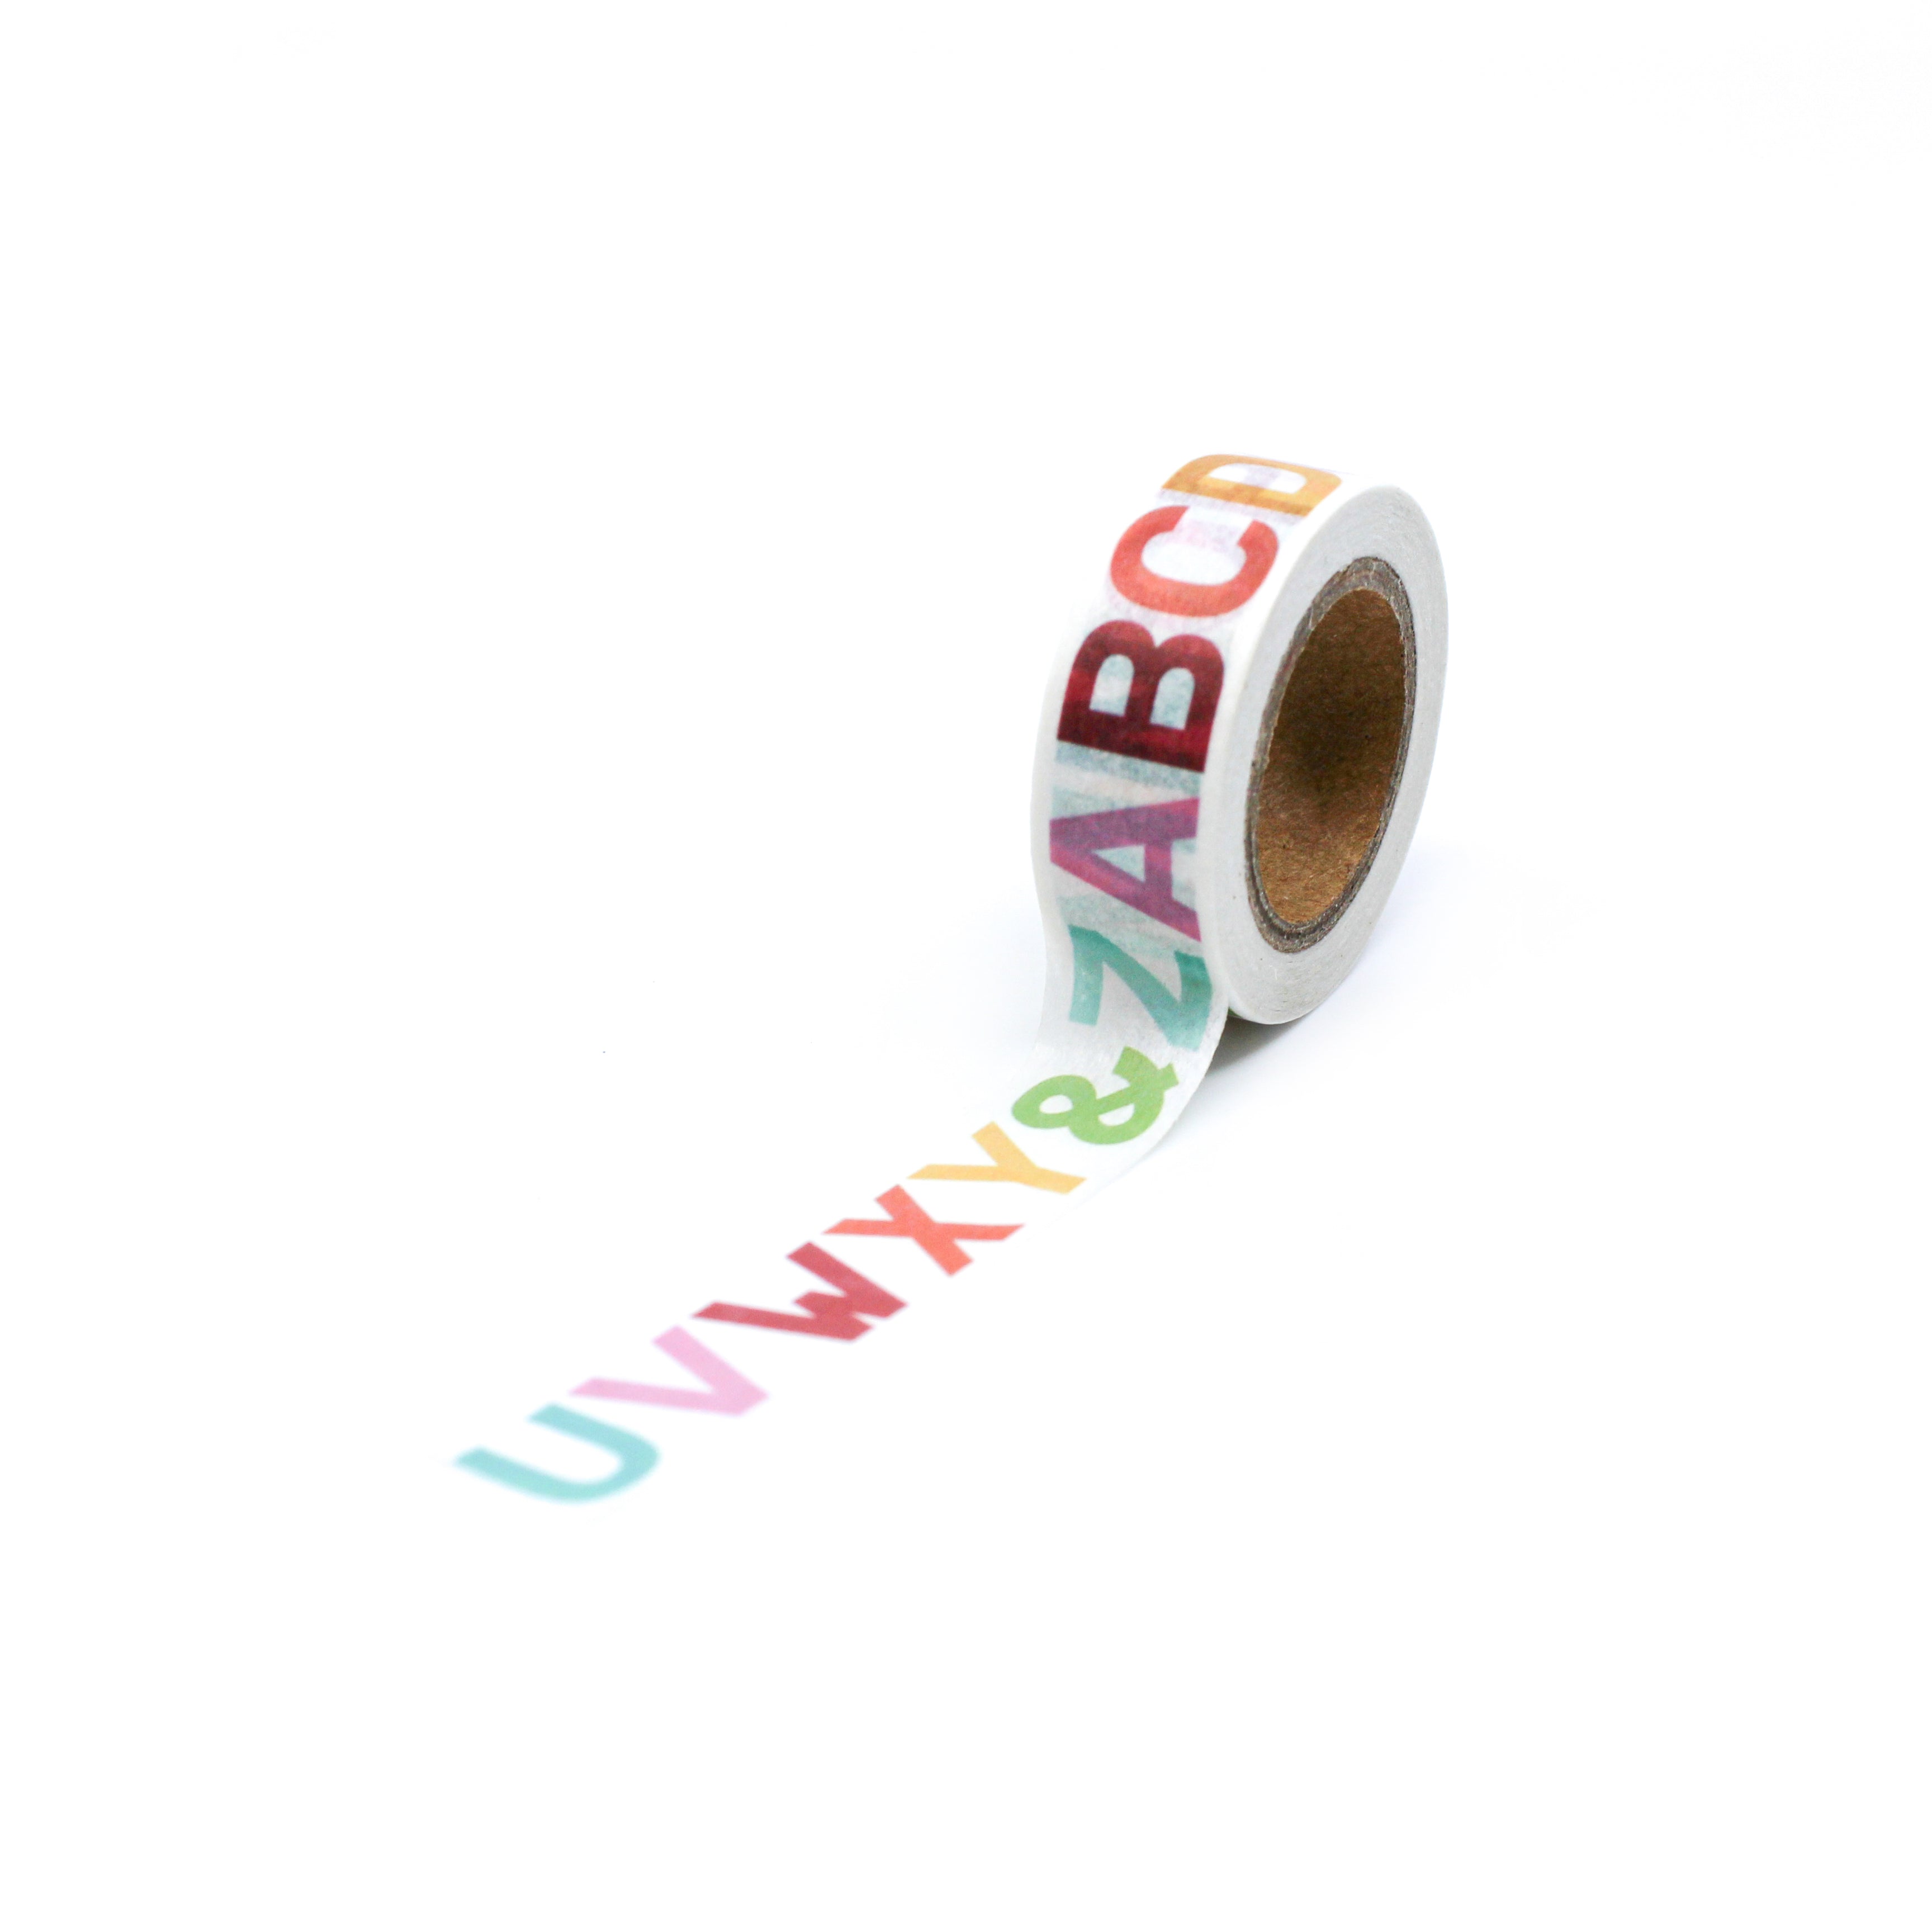 This is a full pattern repeat view of colorful alphabet letters washi tape BBB Supplies Craft Shop